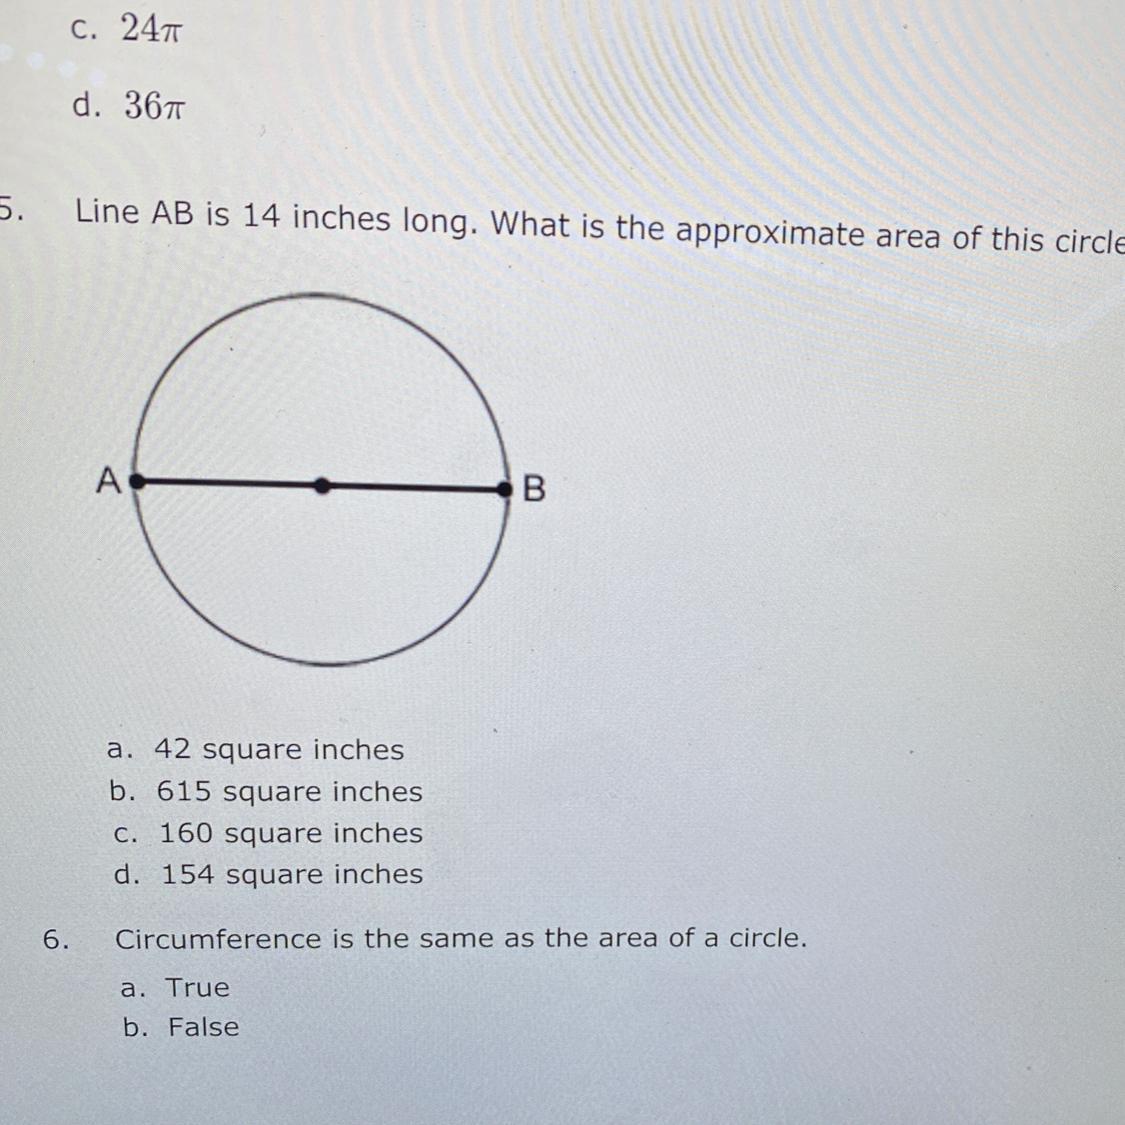 5.Line AB Is 14 Inches Long. What Is The Approximate Area Of This Circle?Ba. 42 Square Inchesb. 615 Square